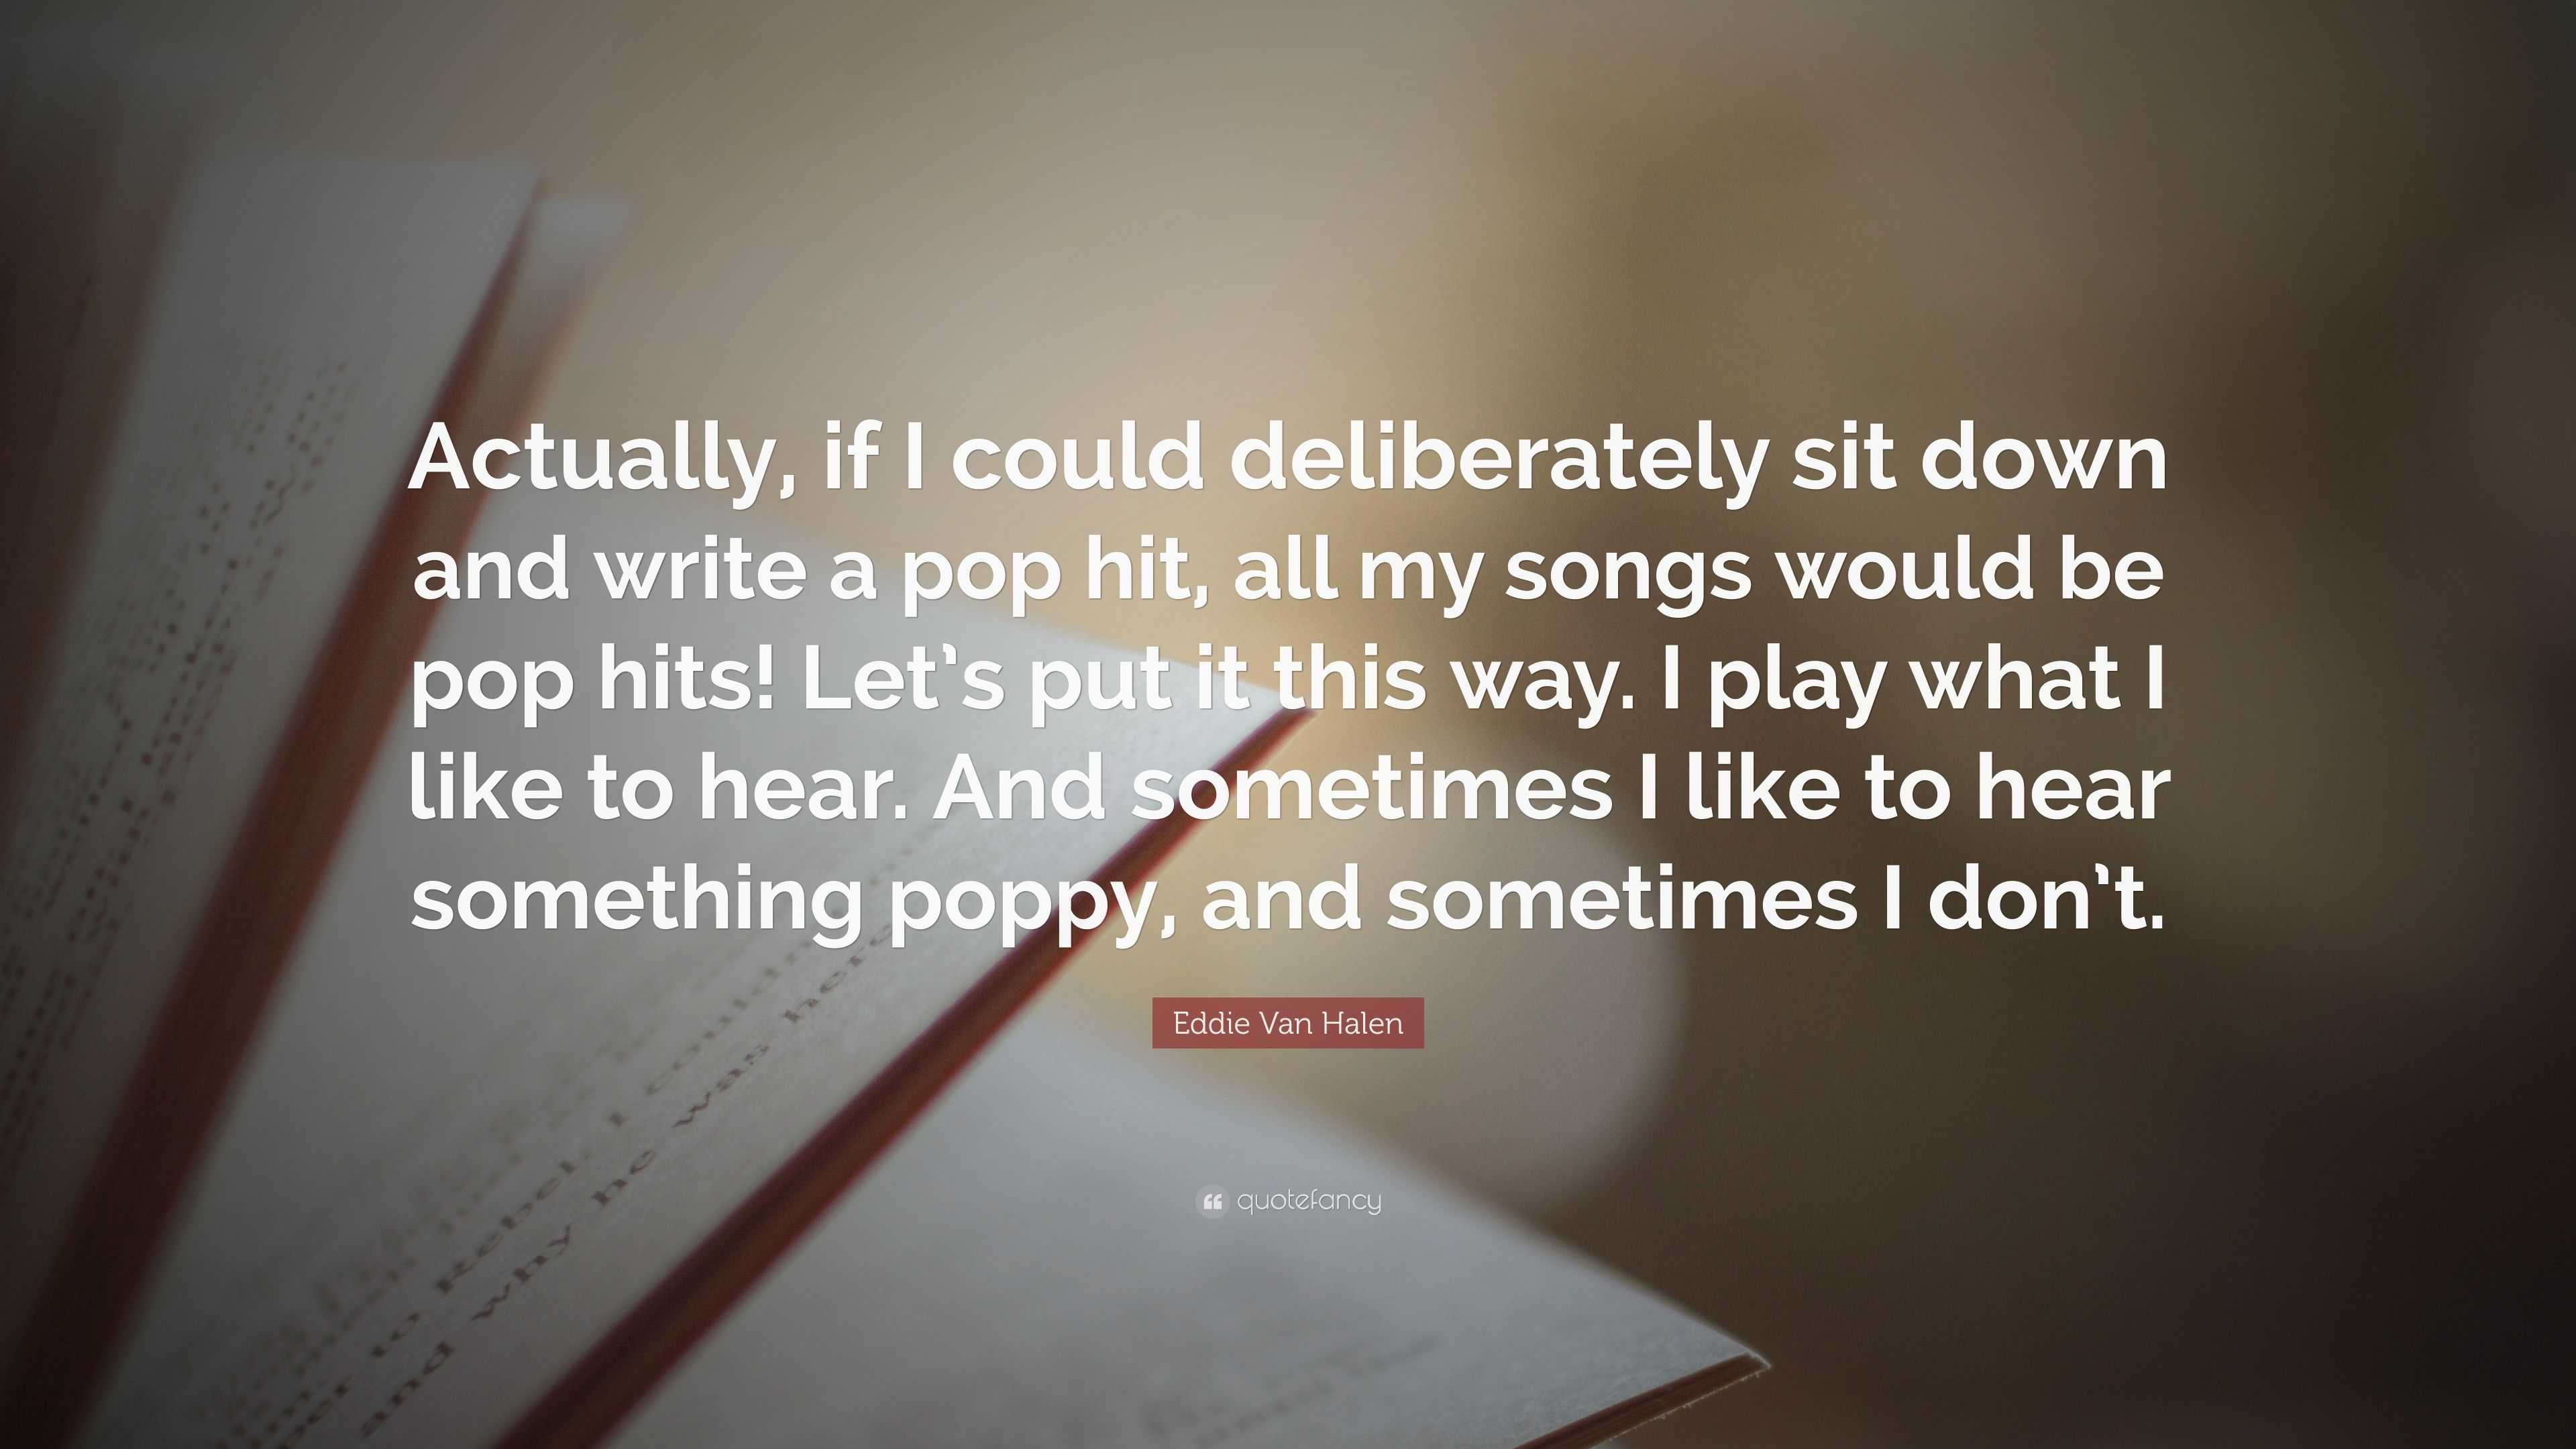 Eddie Van Halen Quote: “Actually, if I could deliberately sit down and ...